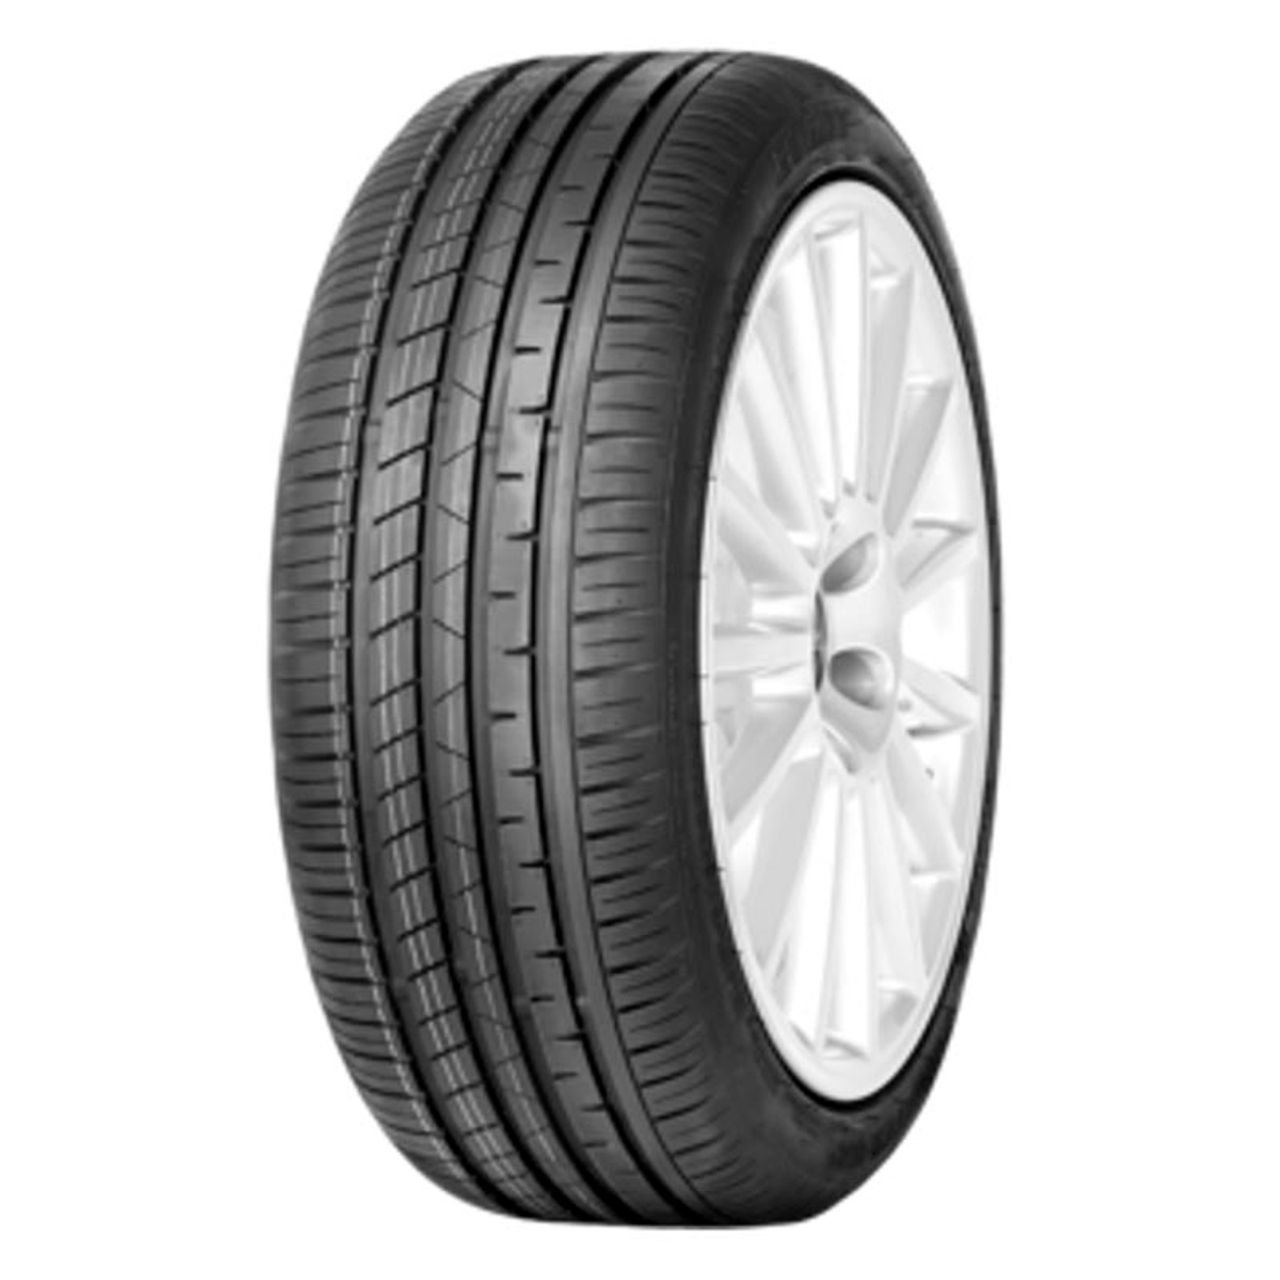 EVENT POTENTEM UHP 245/45R19 102W FR BSW